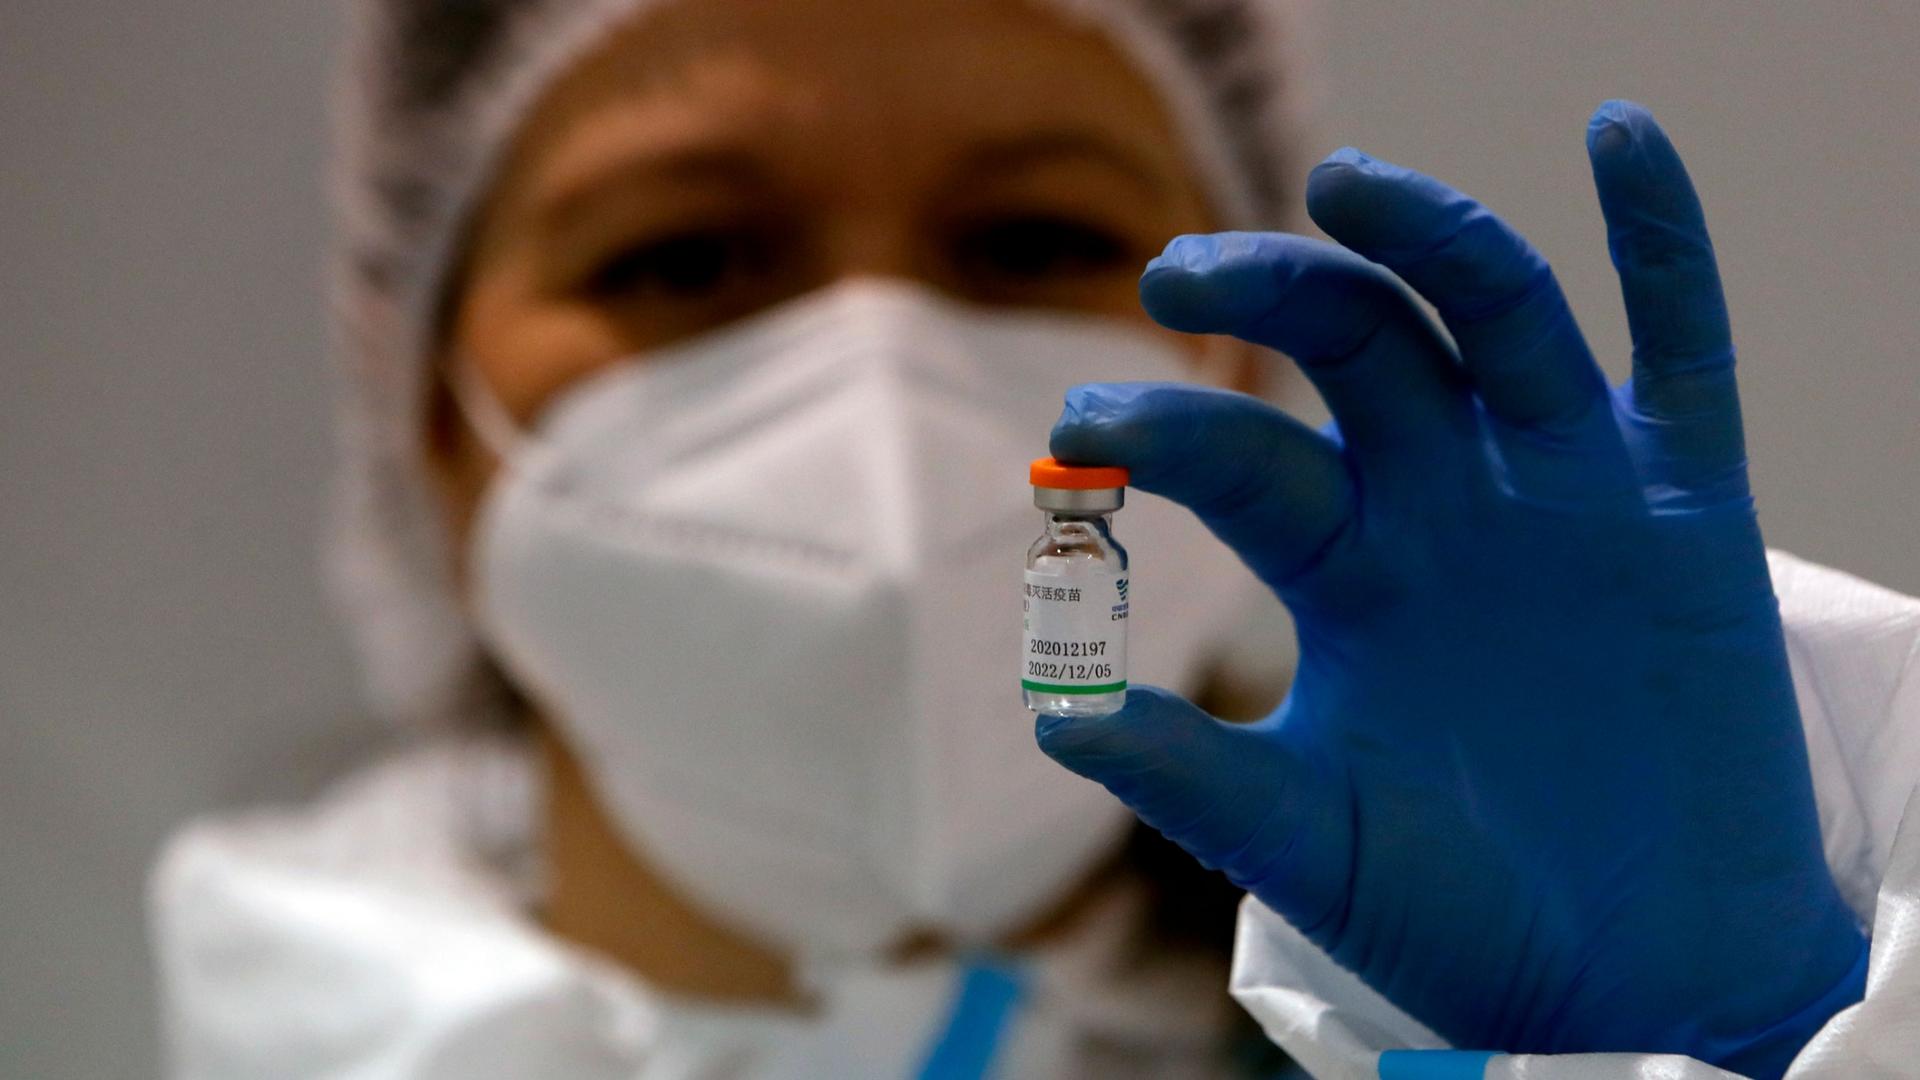 A person is shown wearing a protective medical mask and hair net while holding between their finfers a file of the Sinopharm's COVID-19 vaccine.